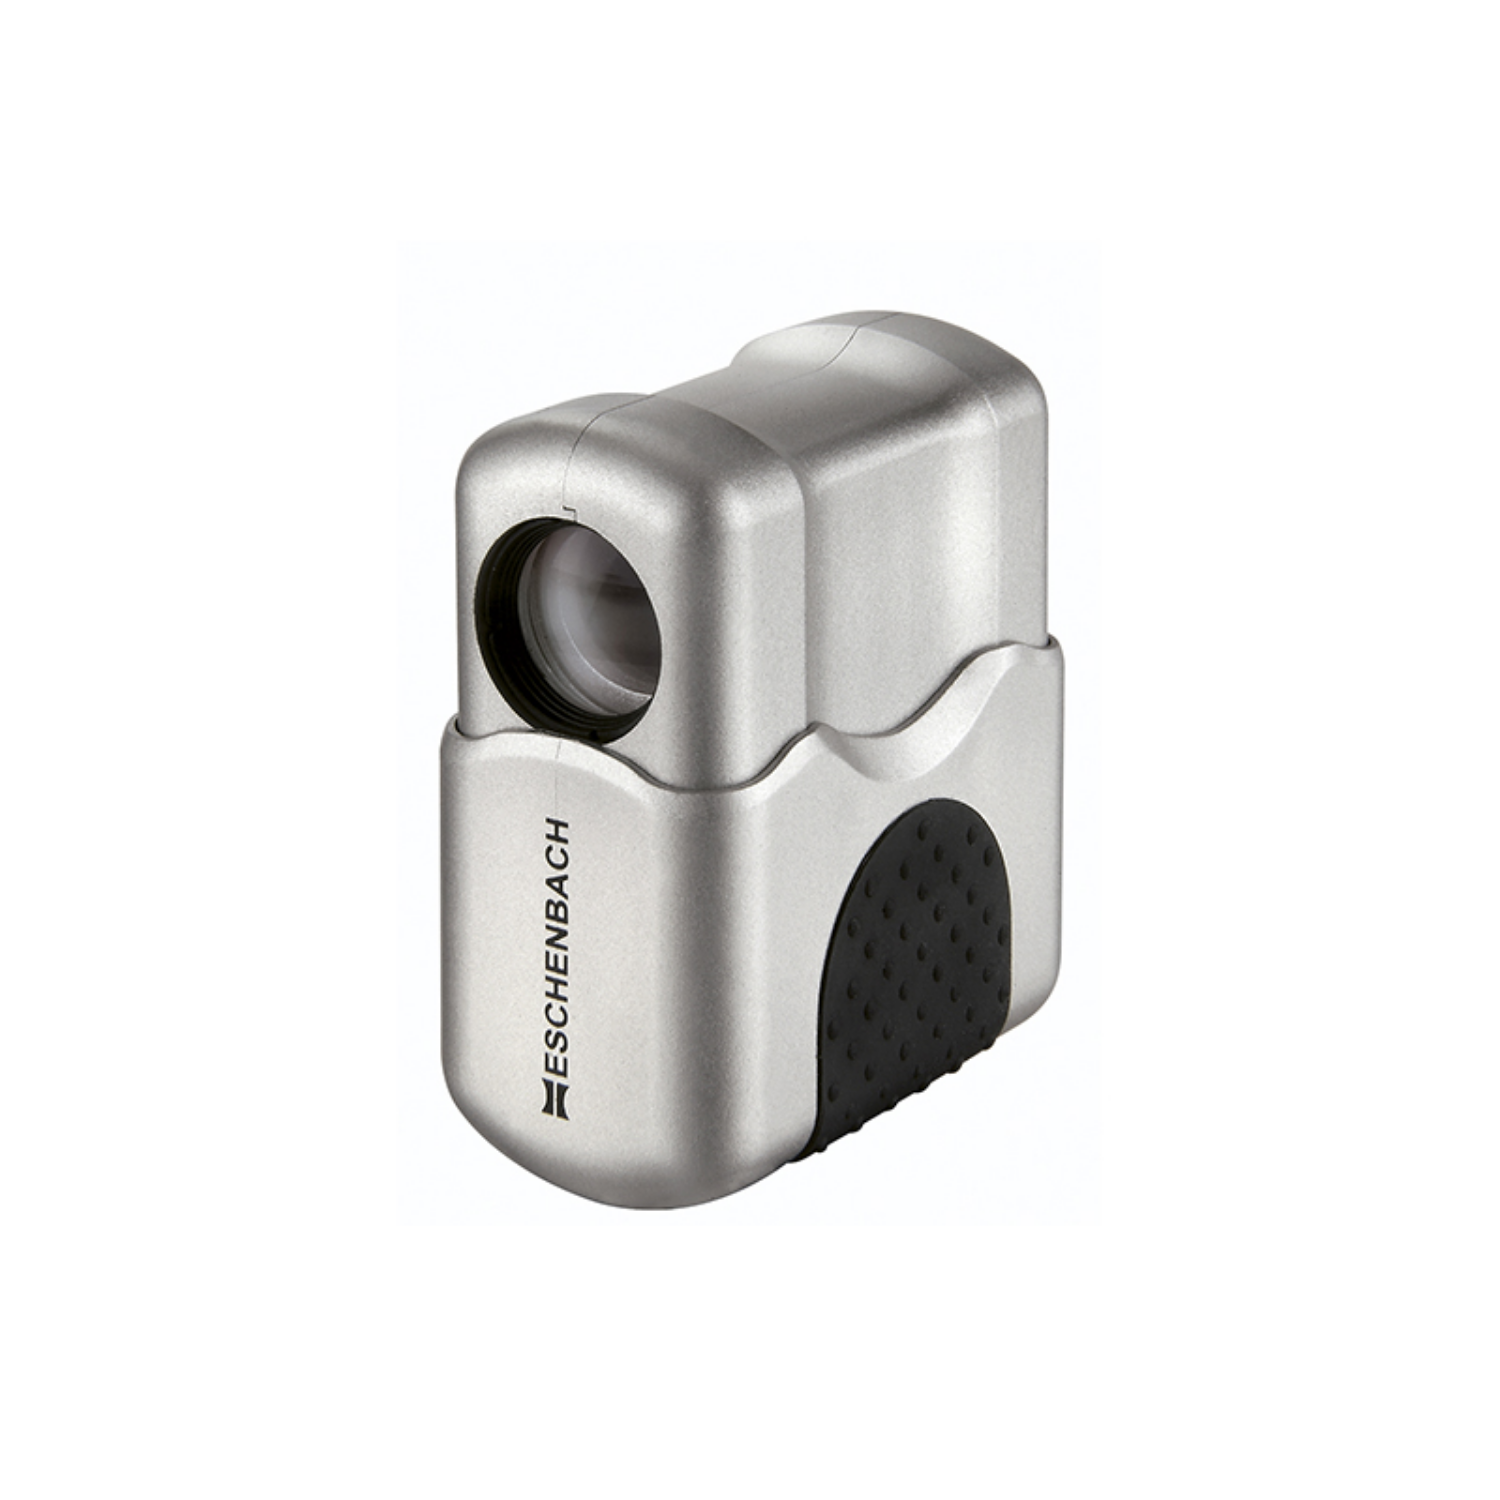 Image of the front of the Microlux 4x13mm Monocular from Eschenbach